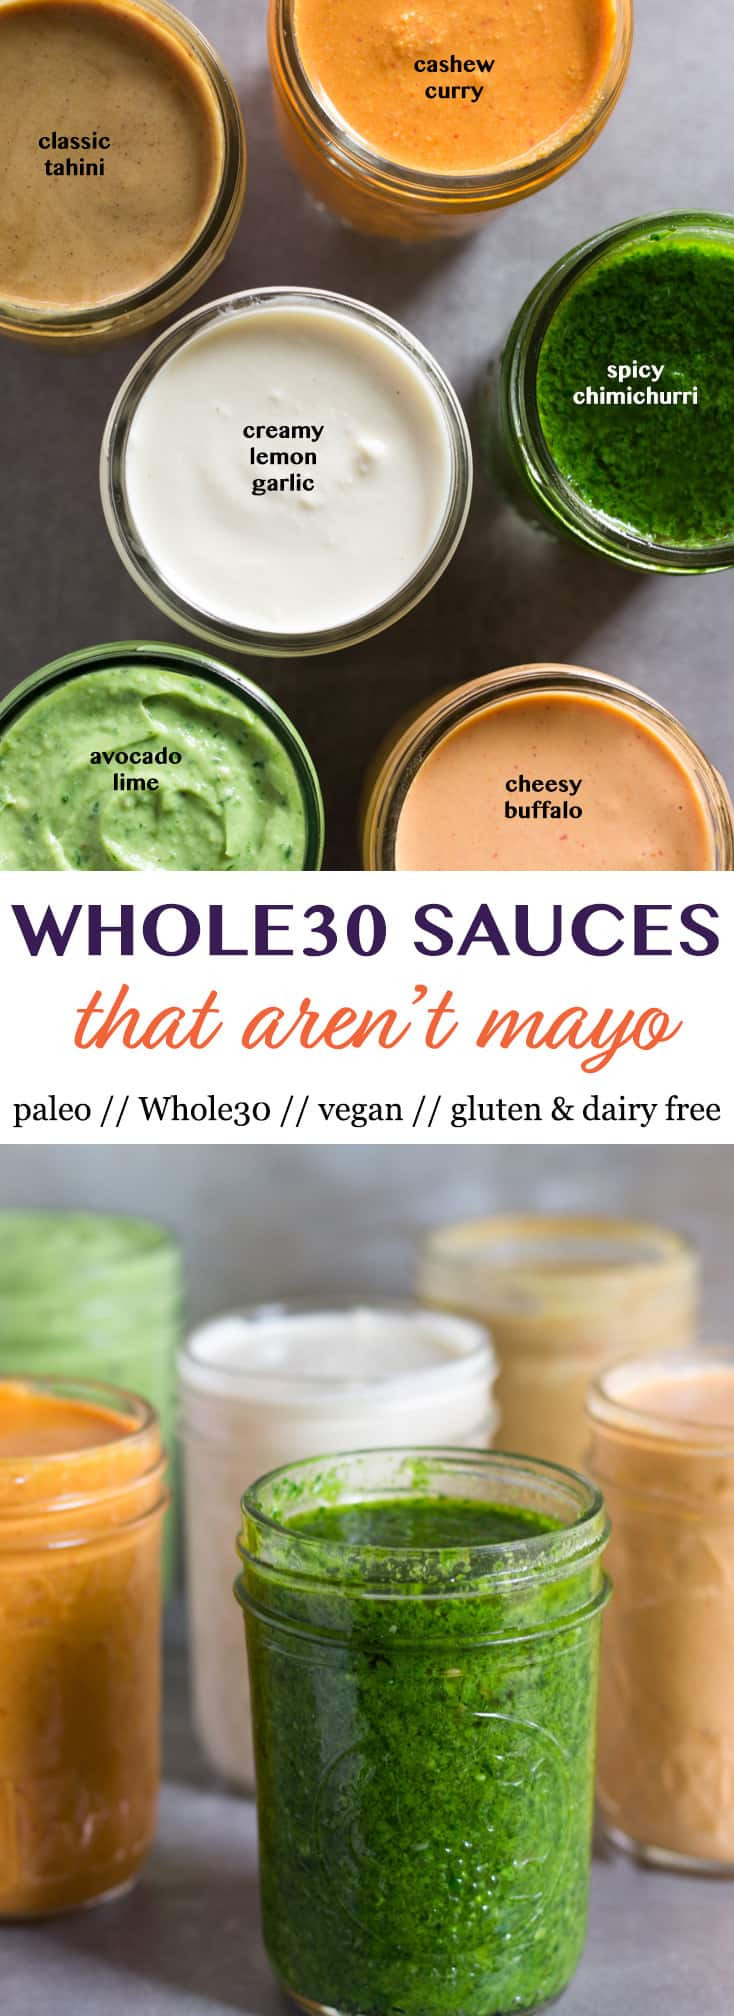 Whole 30 Sauces
 6 Whole30 Sauces that Aren t Mayo Eat the Gains